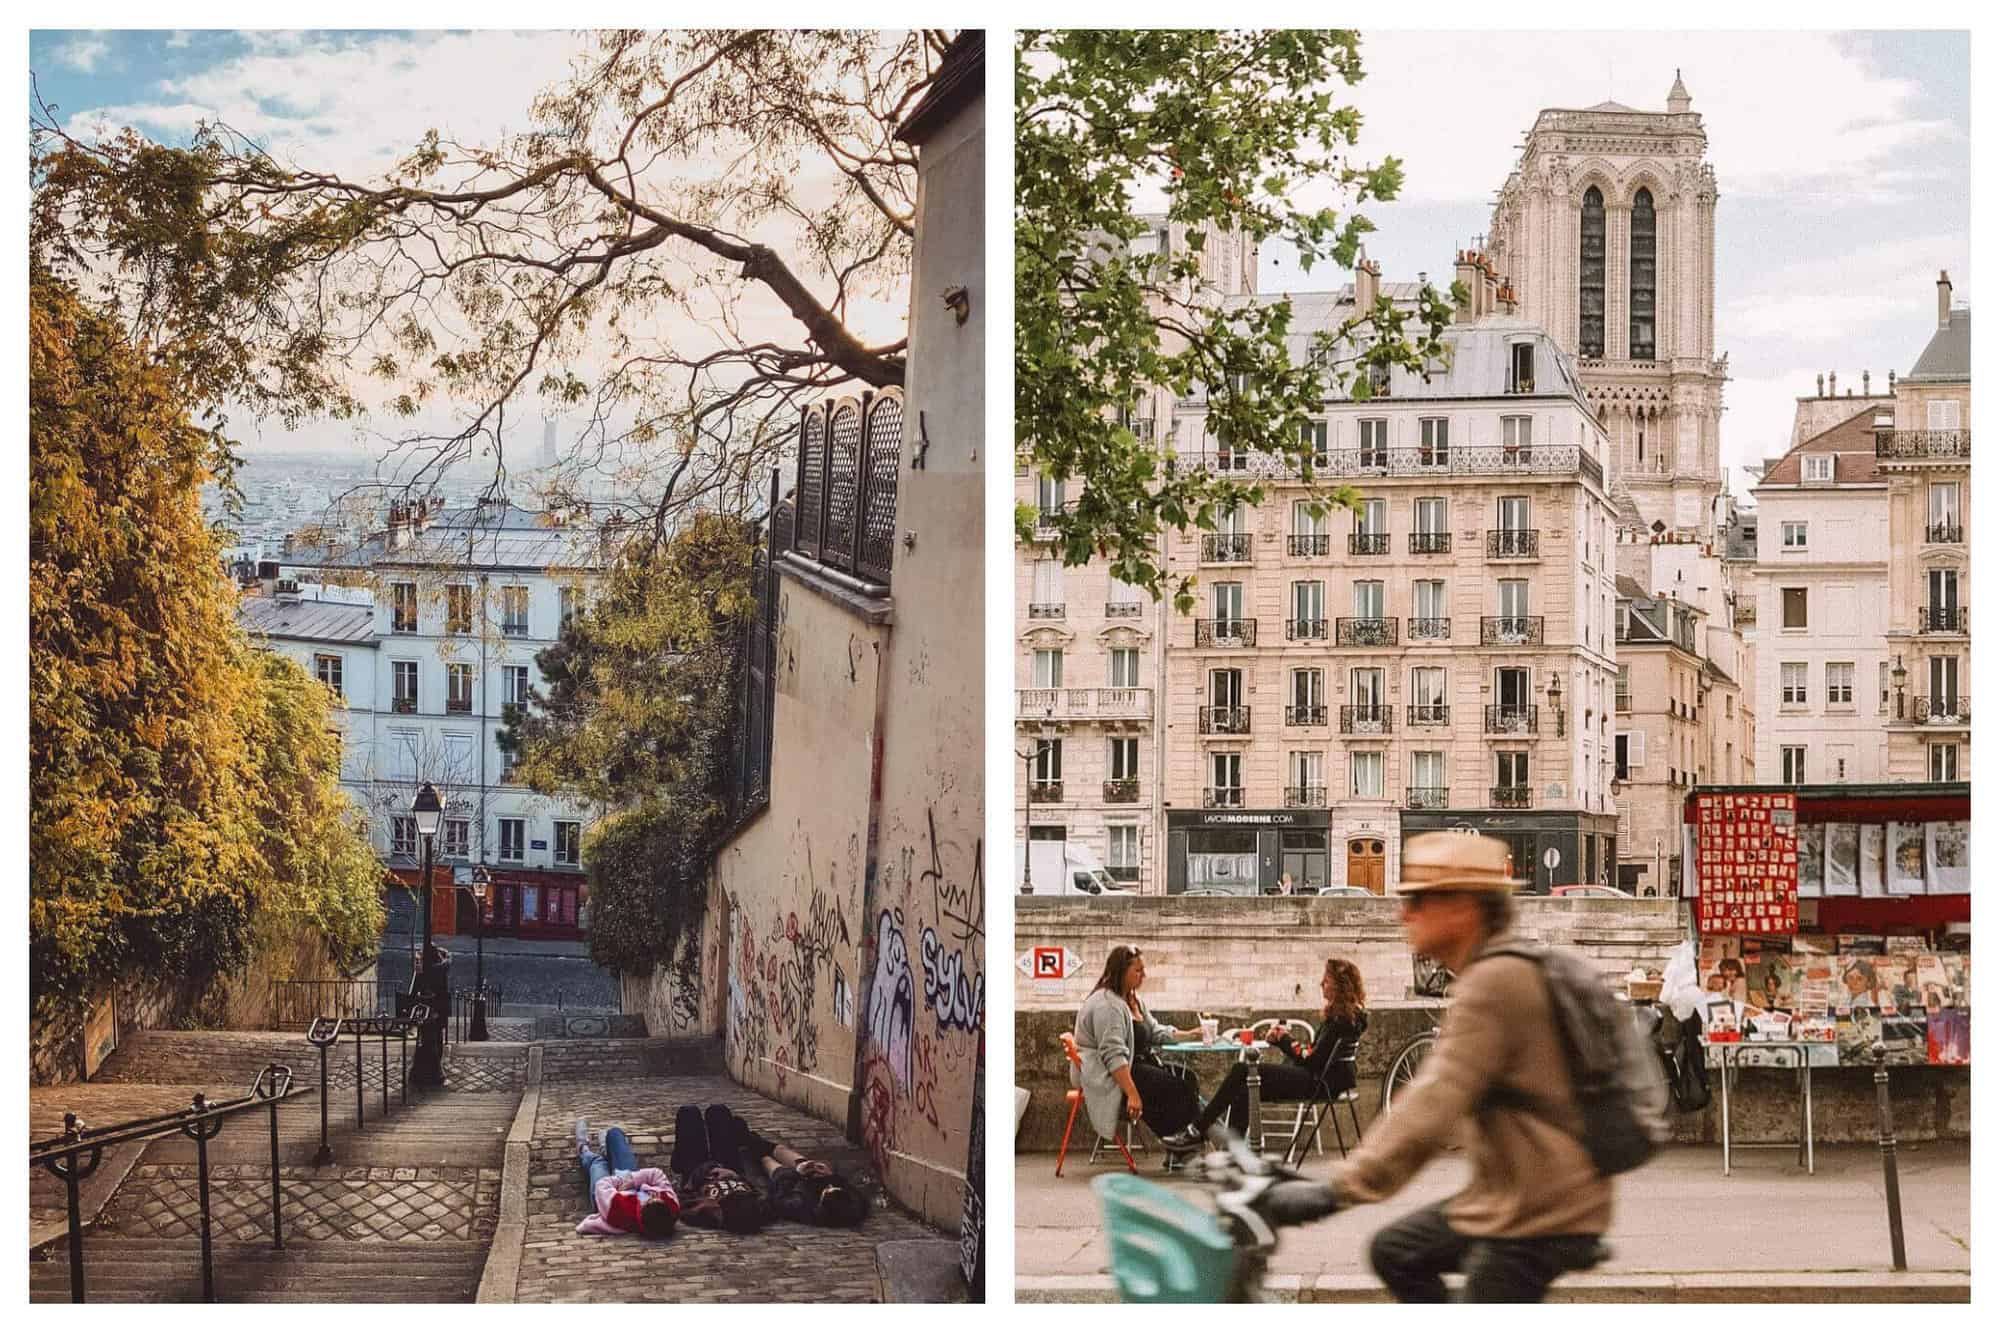 left: a sweeping view of Paris city from montmartre. a man and a woman can be seen lying down and gazing at the sky from the staircase at montmartre. right: a cyclist going past a Parisian road. Beyond him, two women can be seen sitting down and talking to each other.